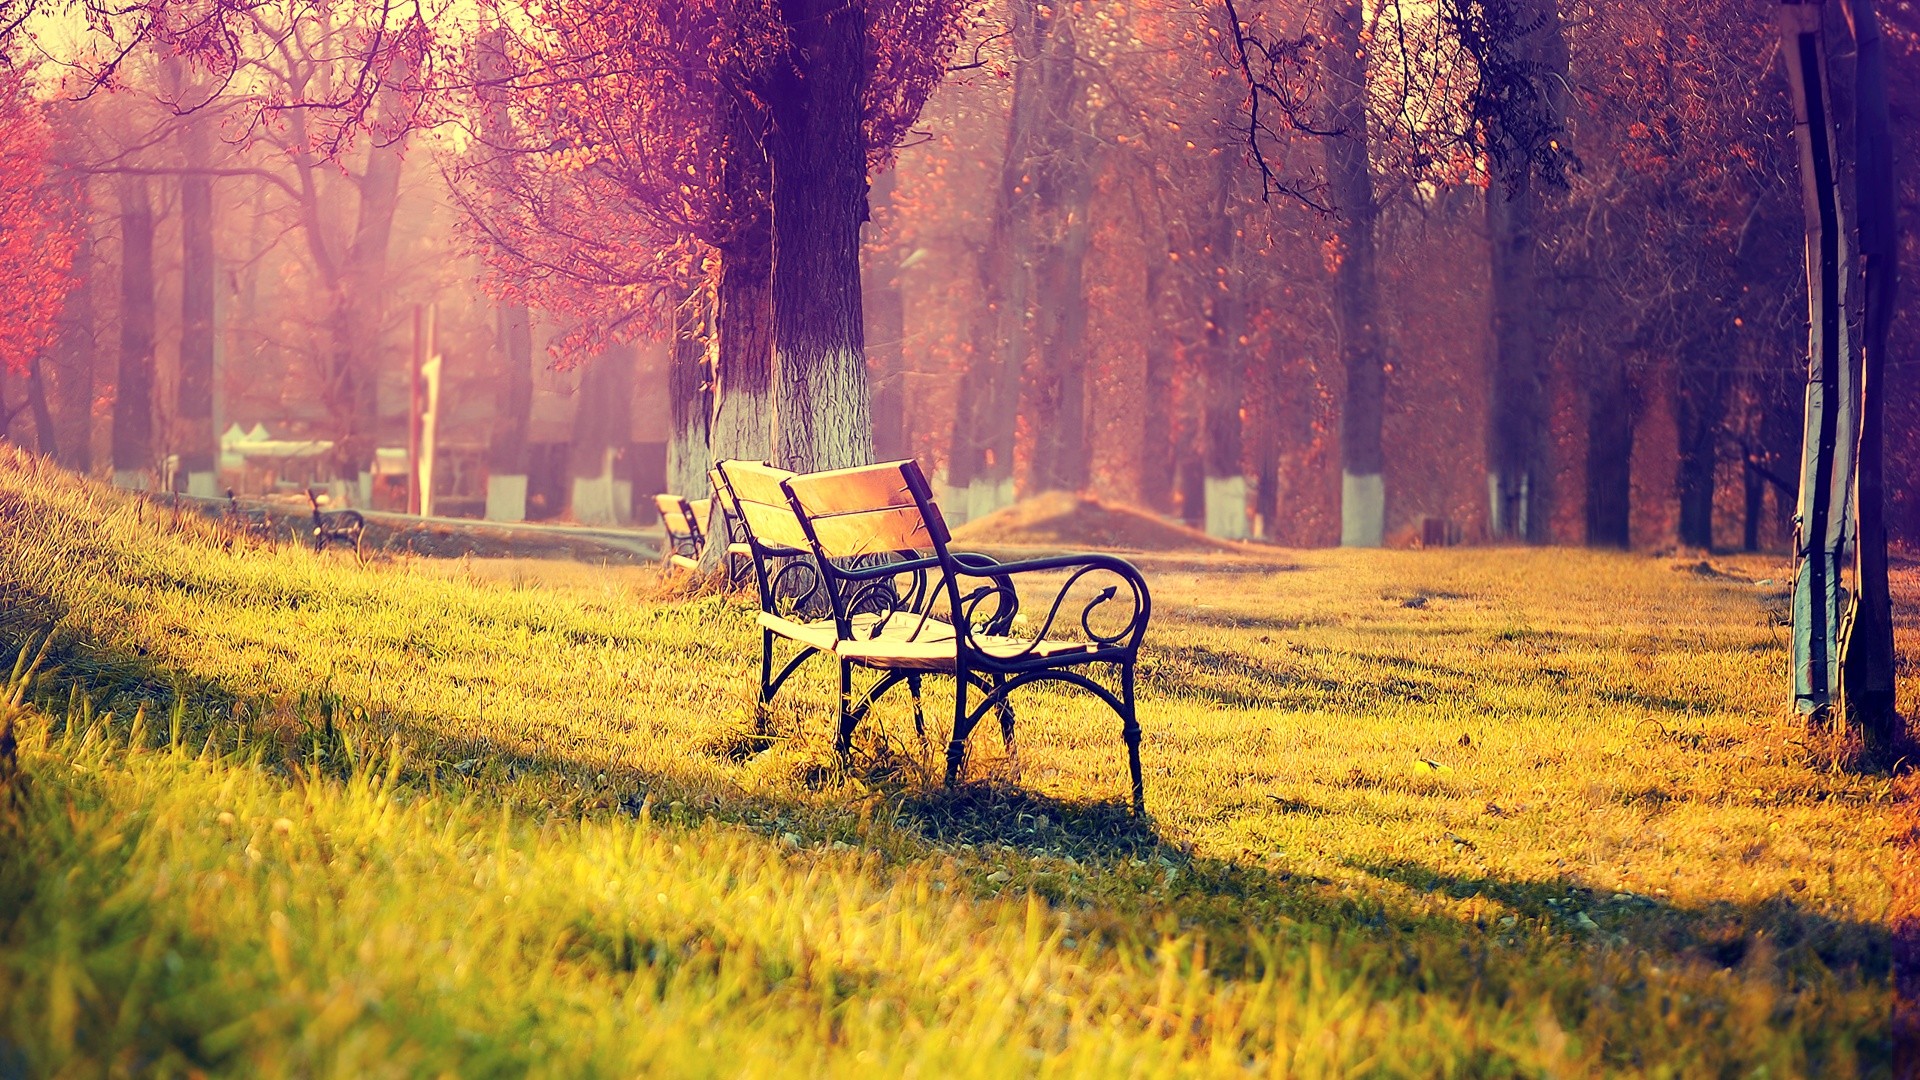 General 1920x1080 bench trees grass outdoors